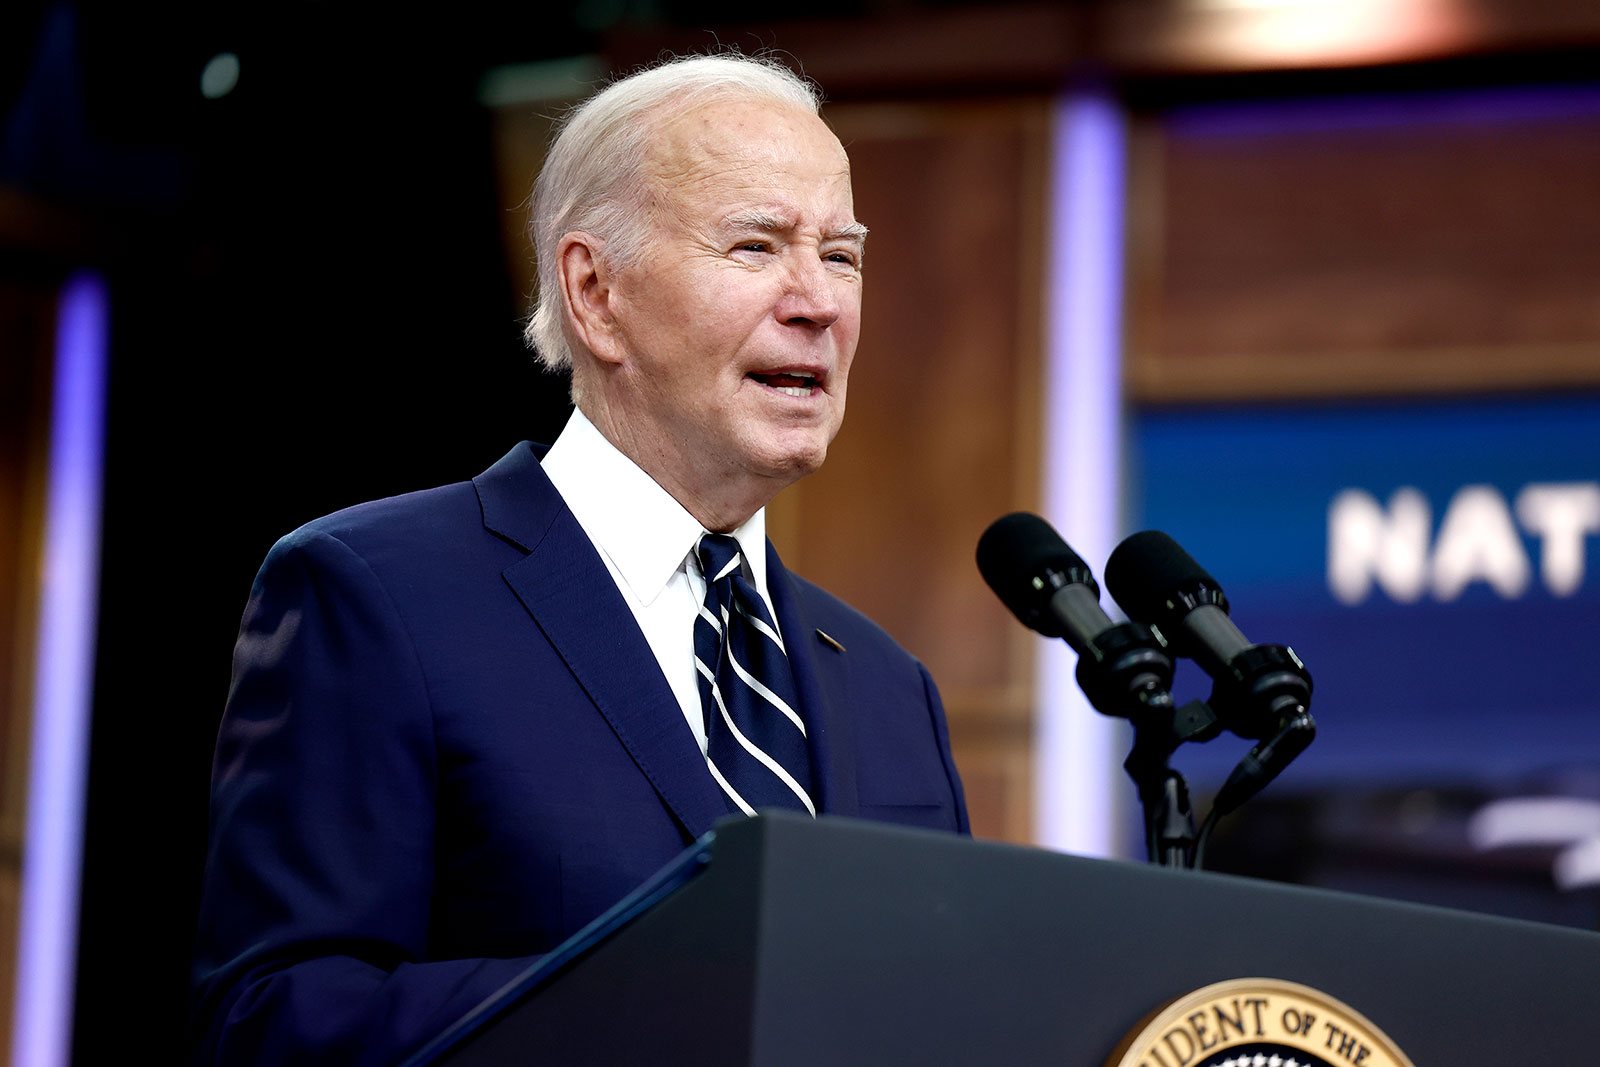 US President Joe Biden gives remarks in the Eisenhower Executive Office Building on the White House campus on Friday in Washington, DC. 